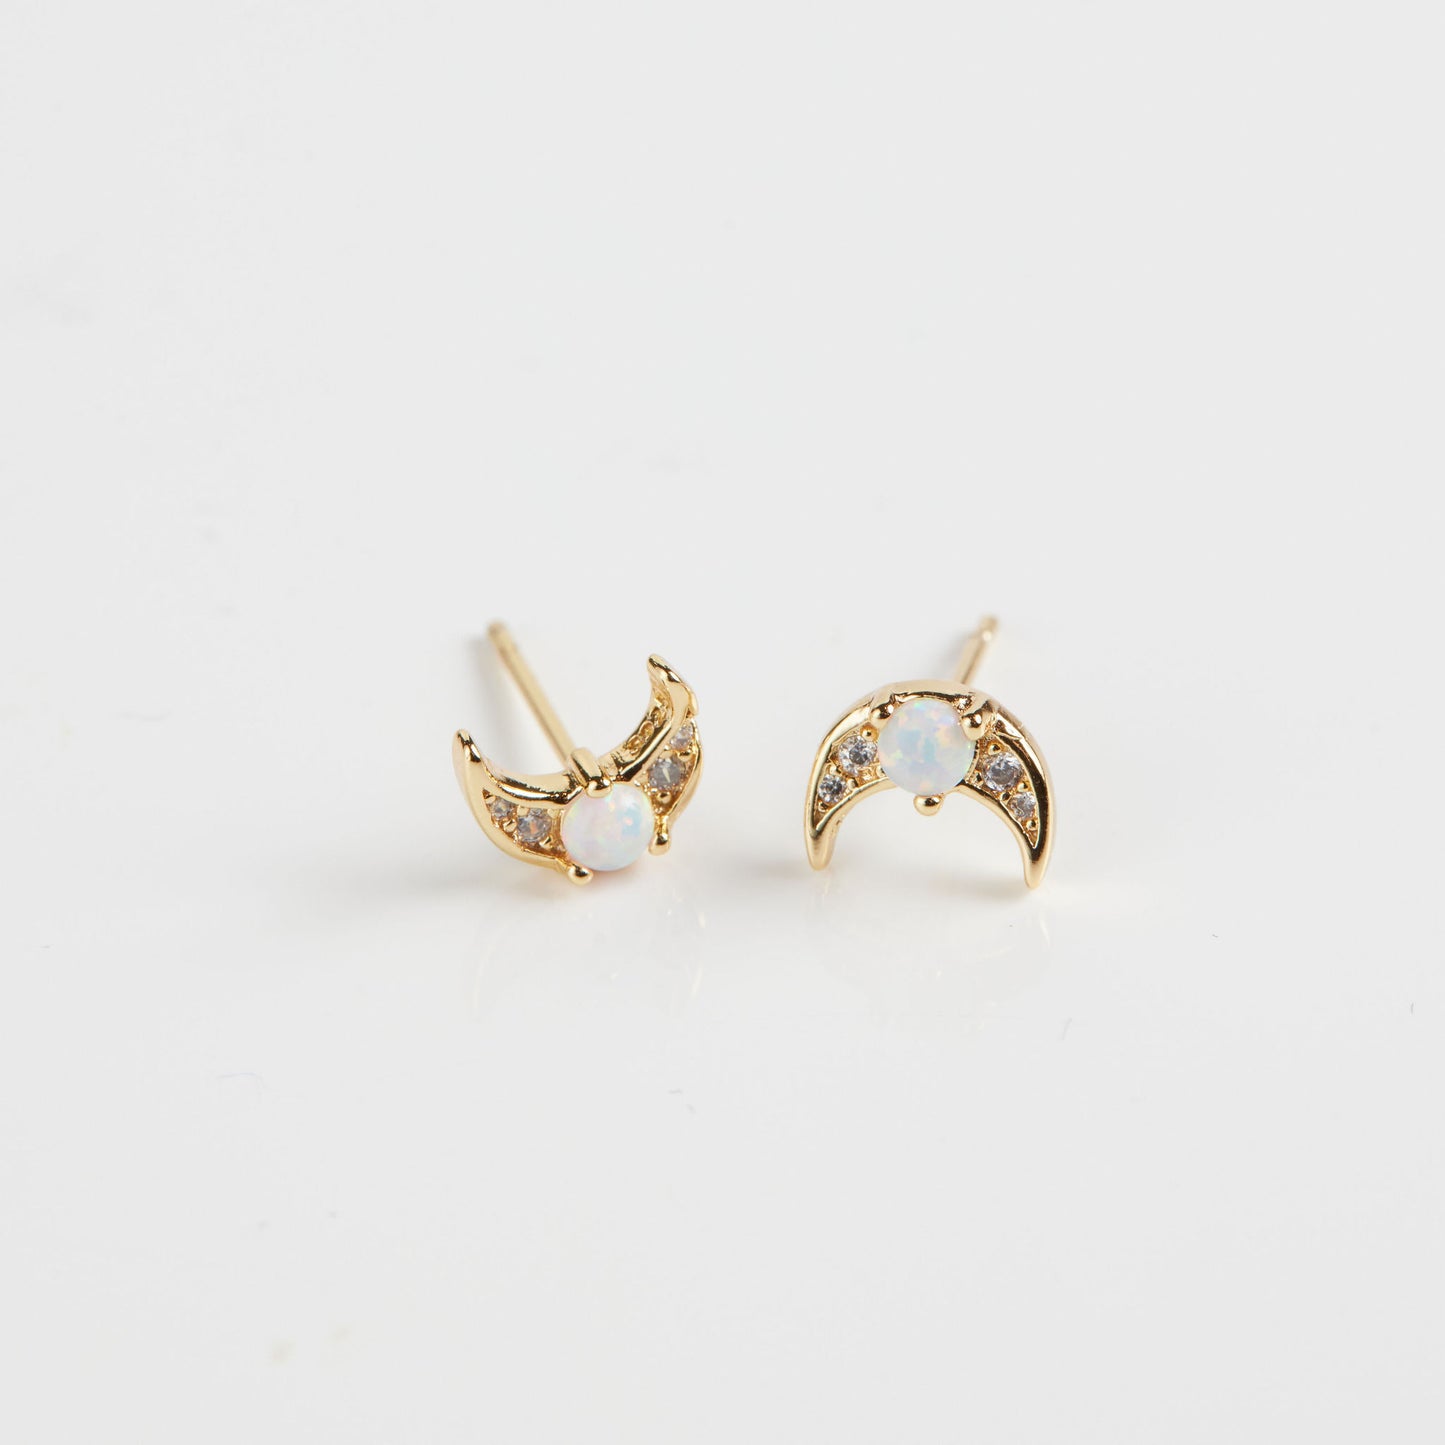 Opal moon crescent studs on white background